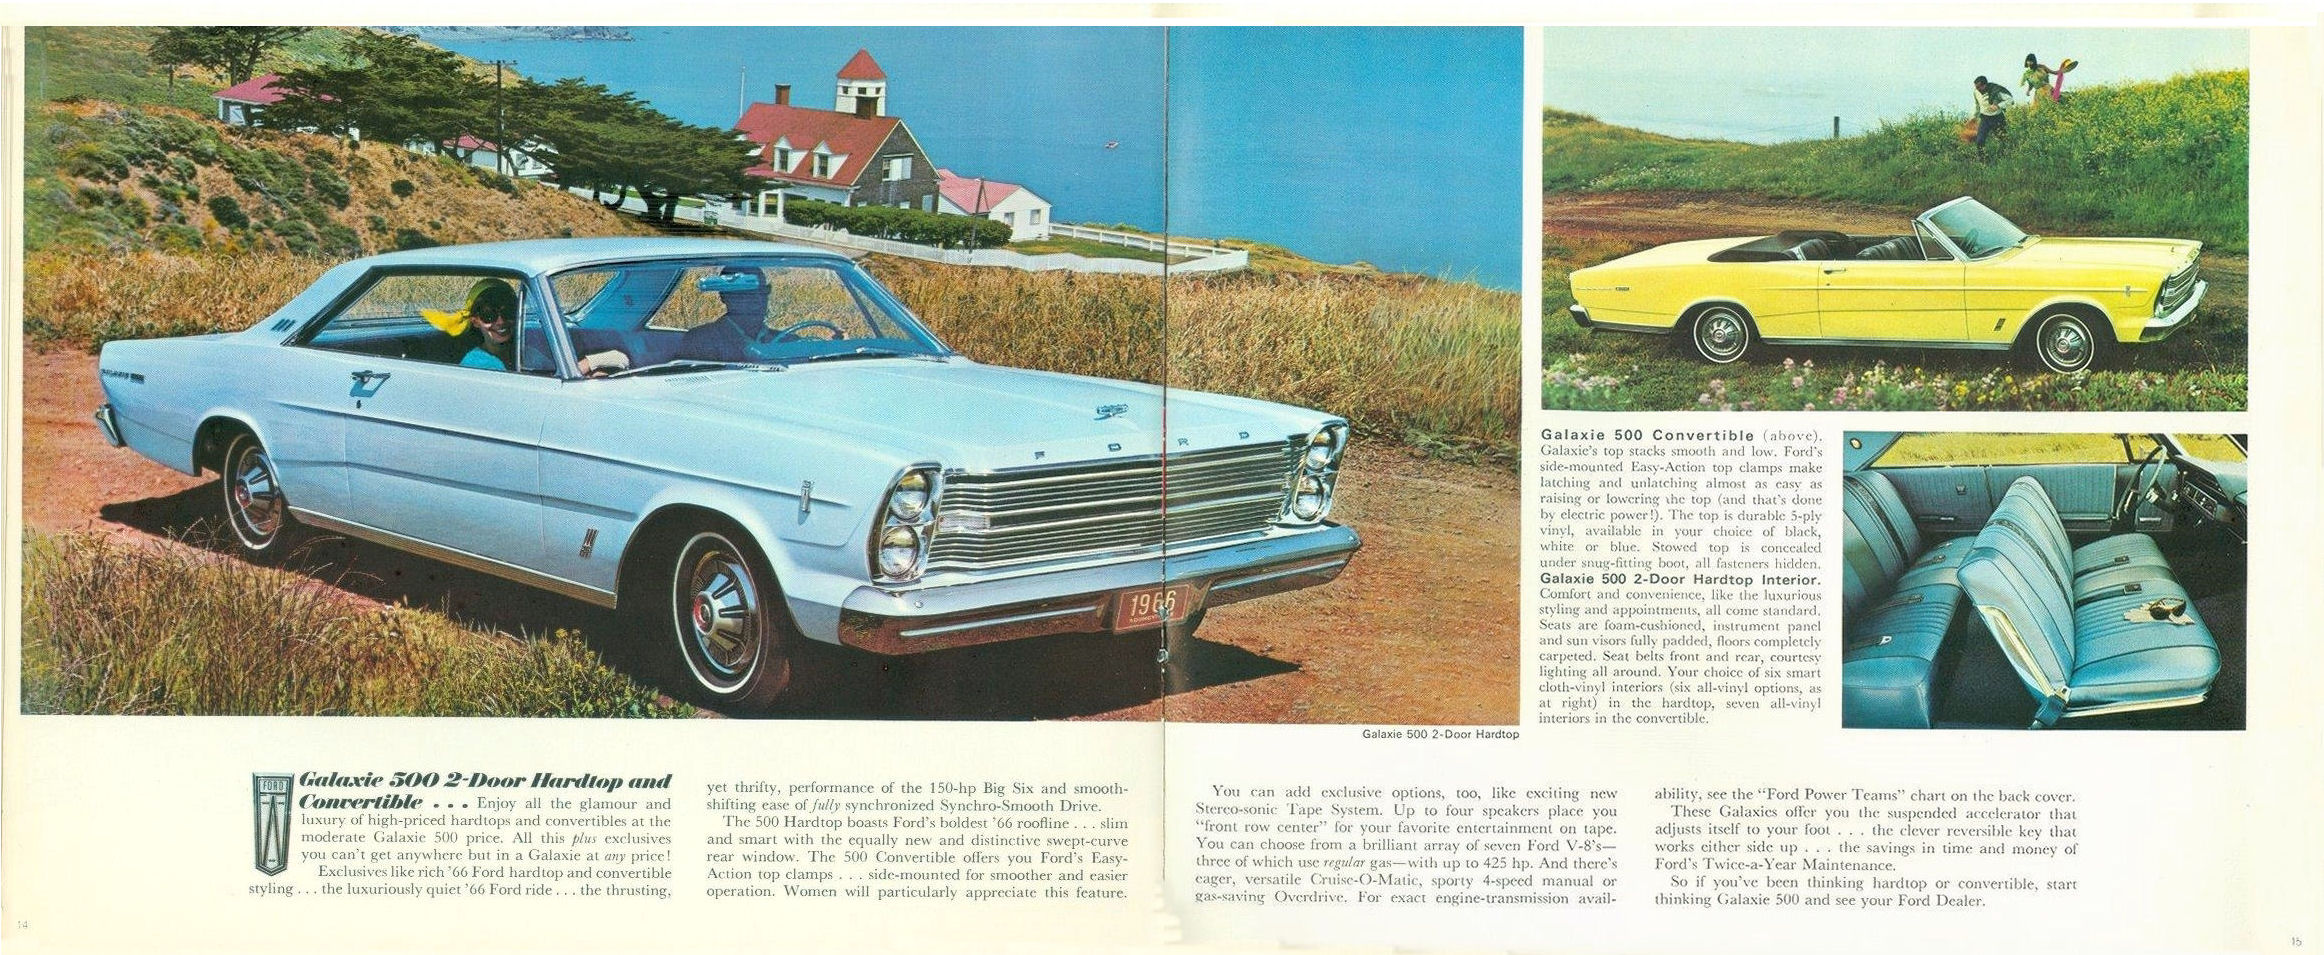 1966_Ford_Full_Size-14-15